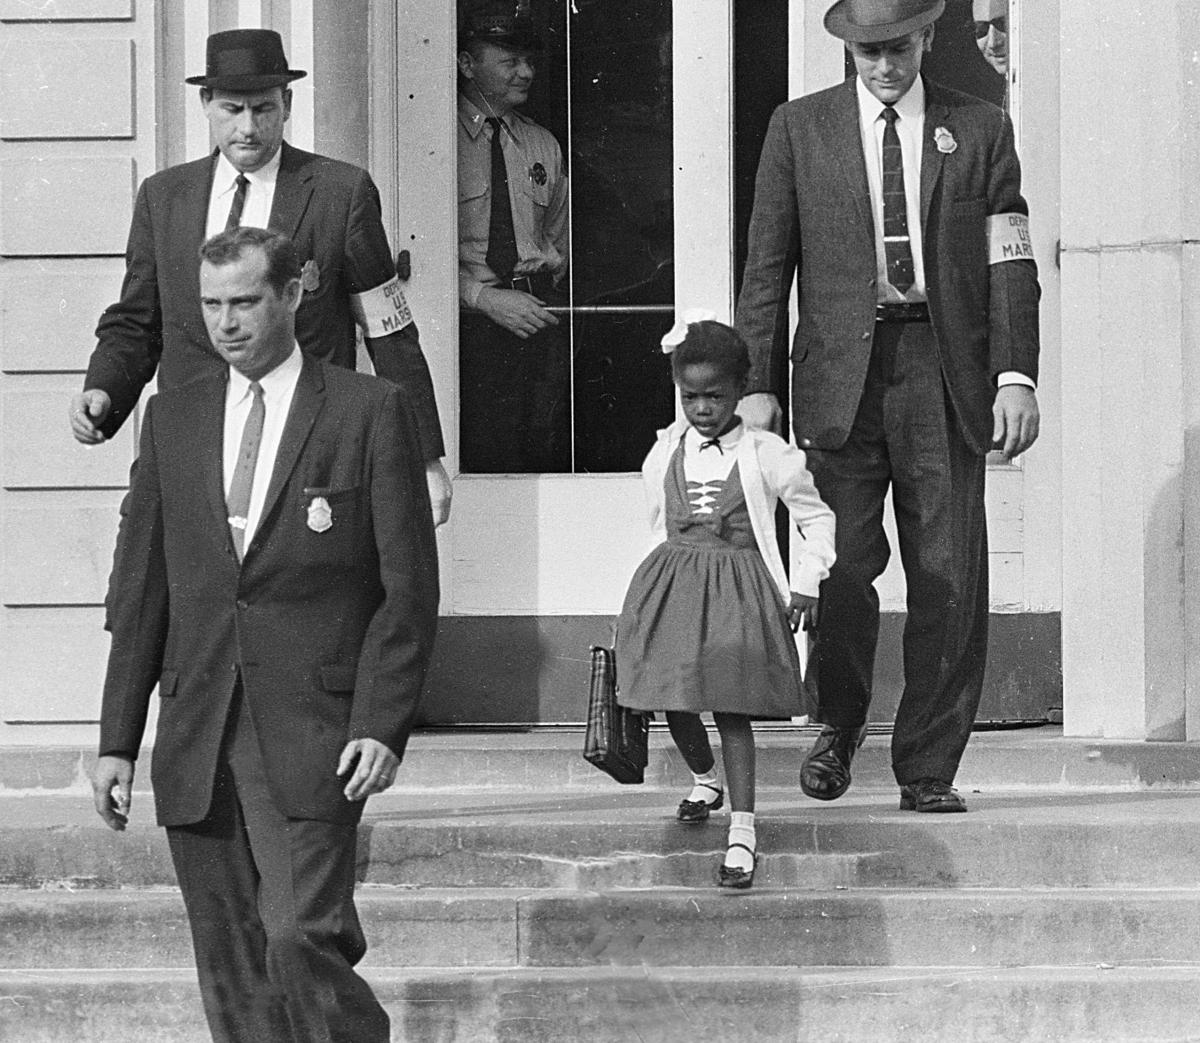 Ruby Bridges, the first African-American to attend a white elementary school in the deep South, November 14th, 1960